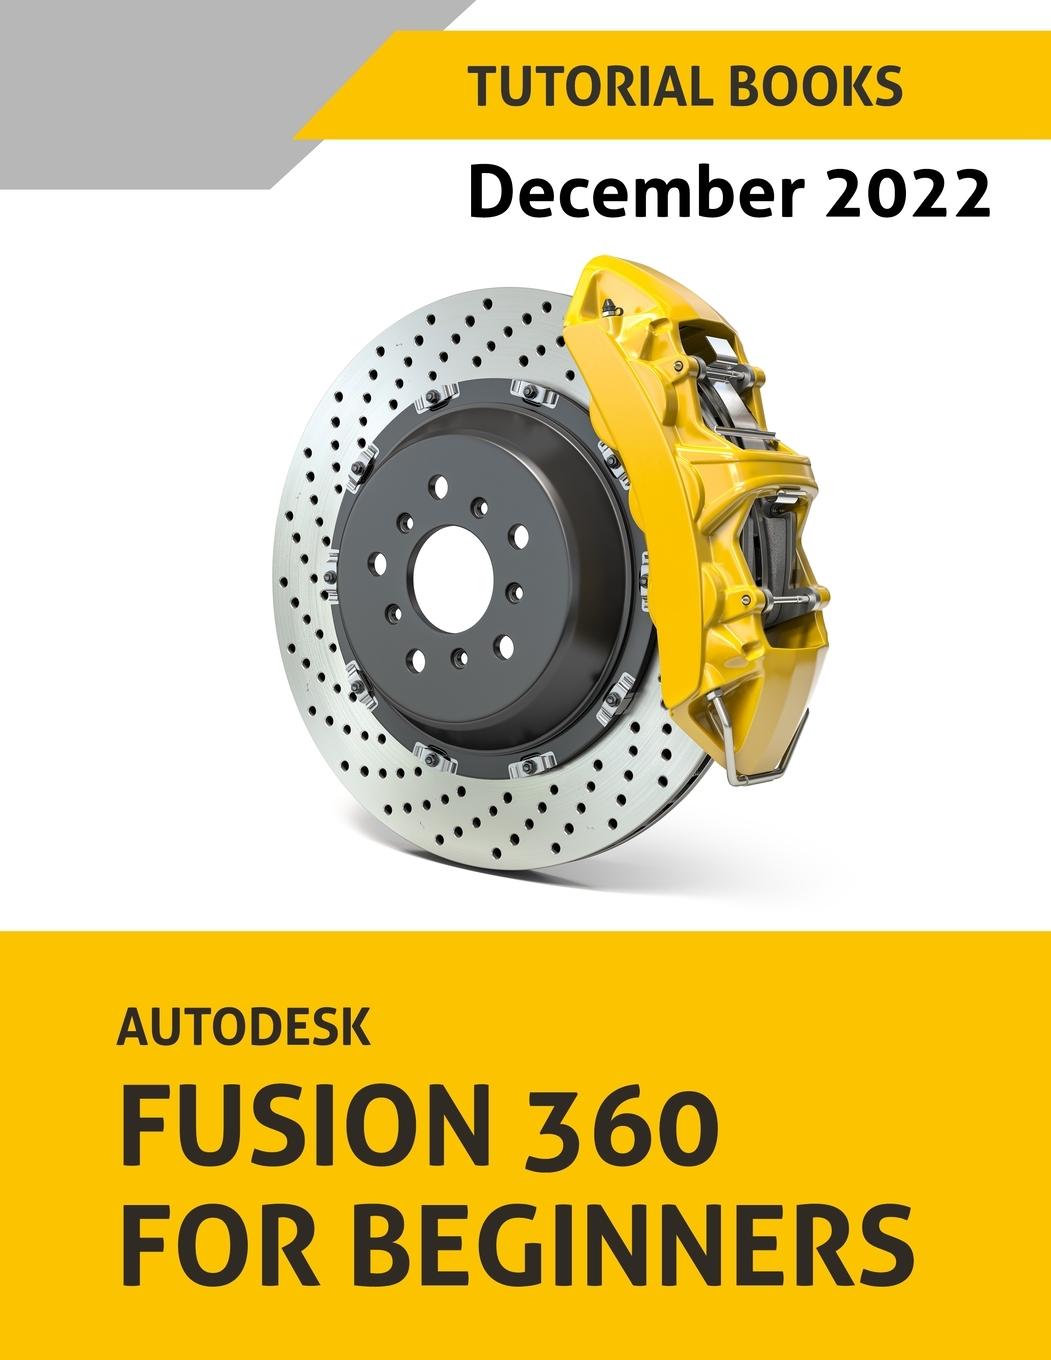 Kniha Autodesk Fusion 360 For Beginners (December 2022) 